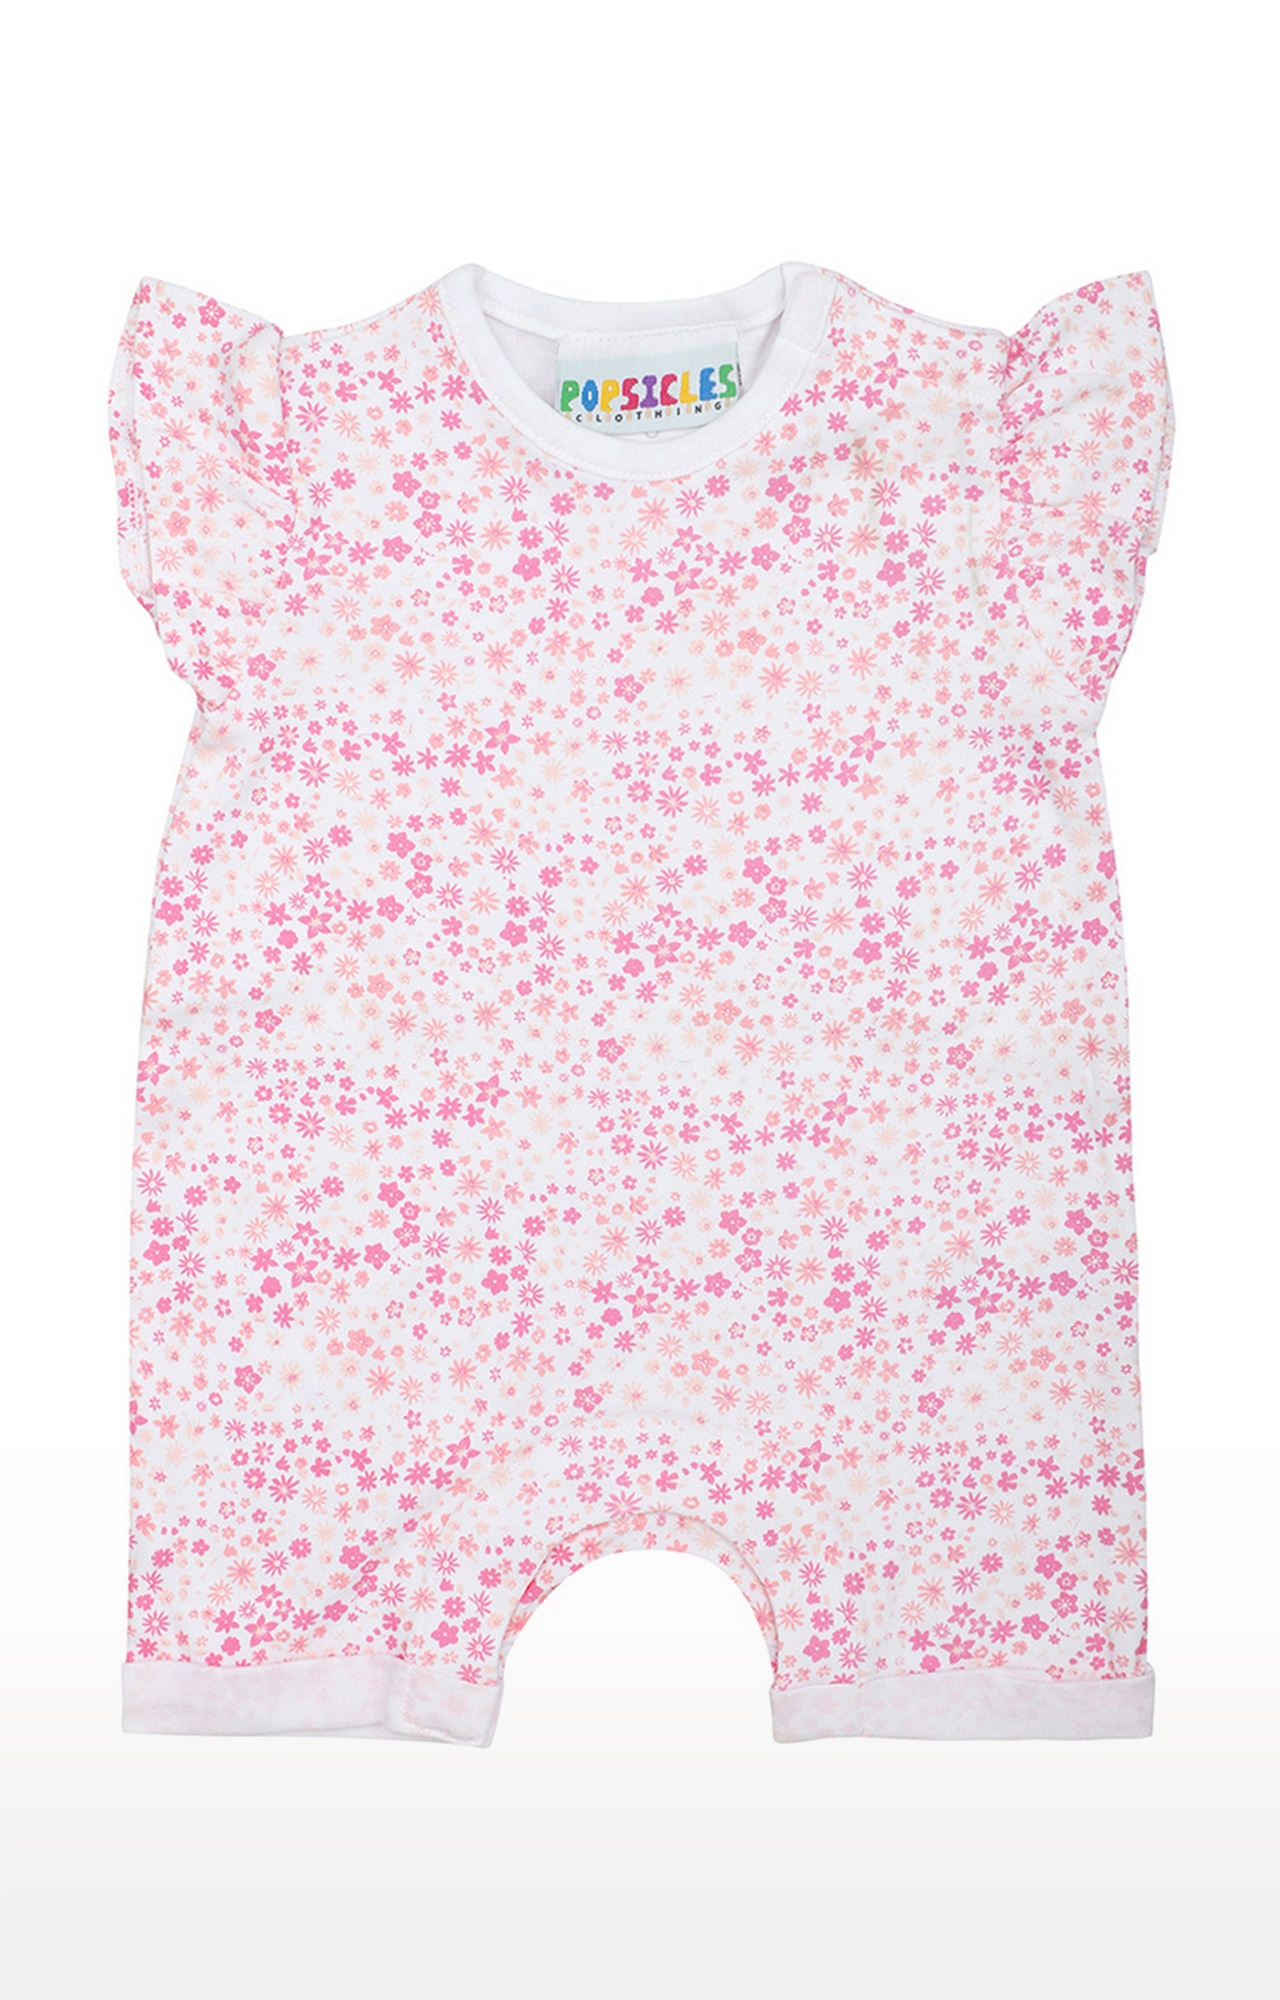 Popsicles Clothing | Popsicles Soft Cotton Comfort fit Round Neck Cap Sleeves Girls Baby Romper - Pink  (0-3 Months)